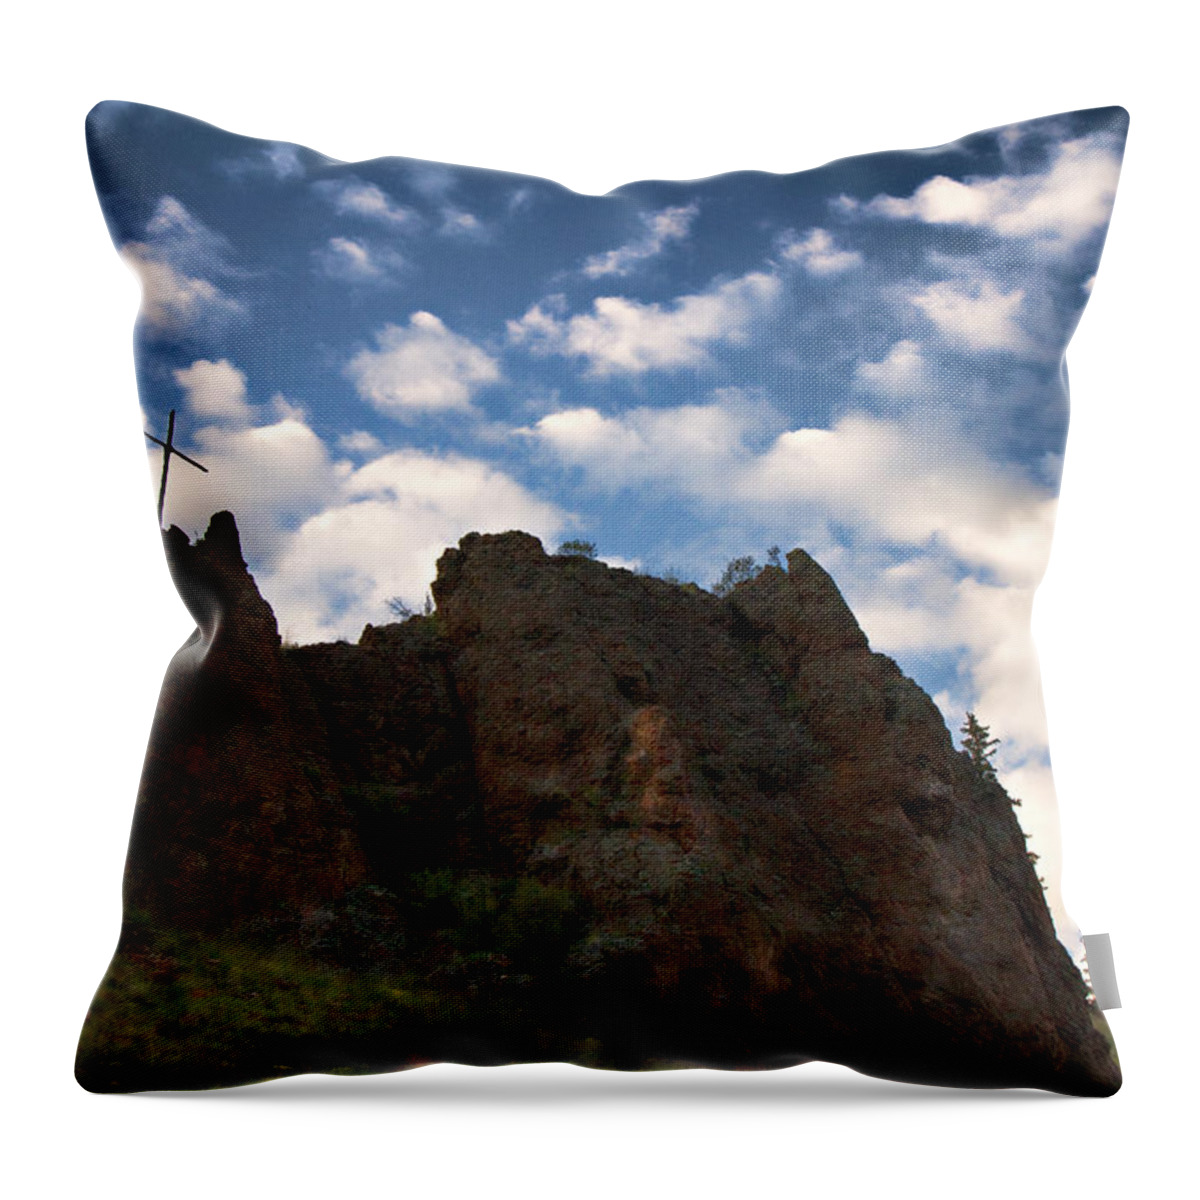 Clouds Throw Pillow featuring the photograph Rugged Mountain Cross by Lana Trussell